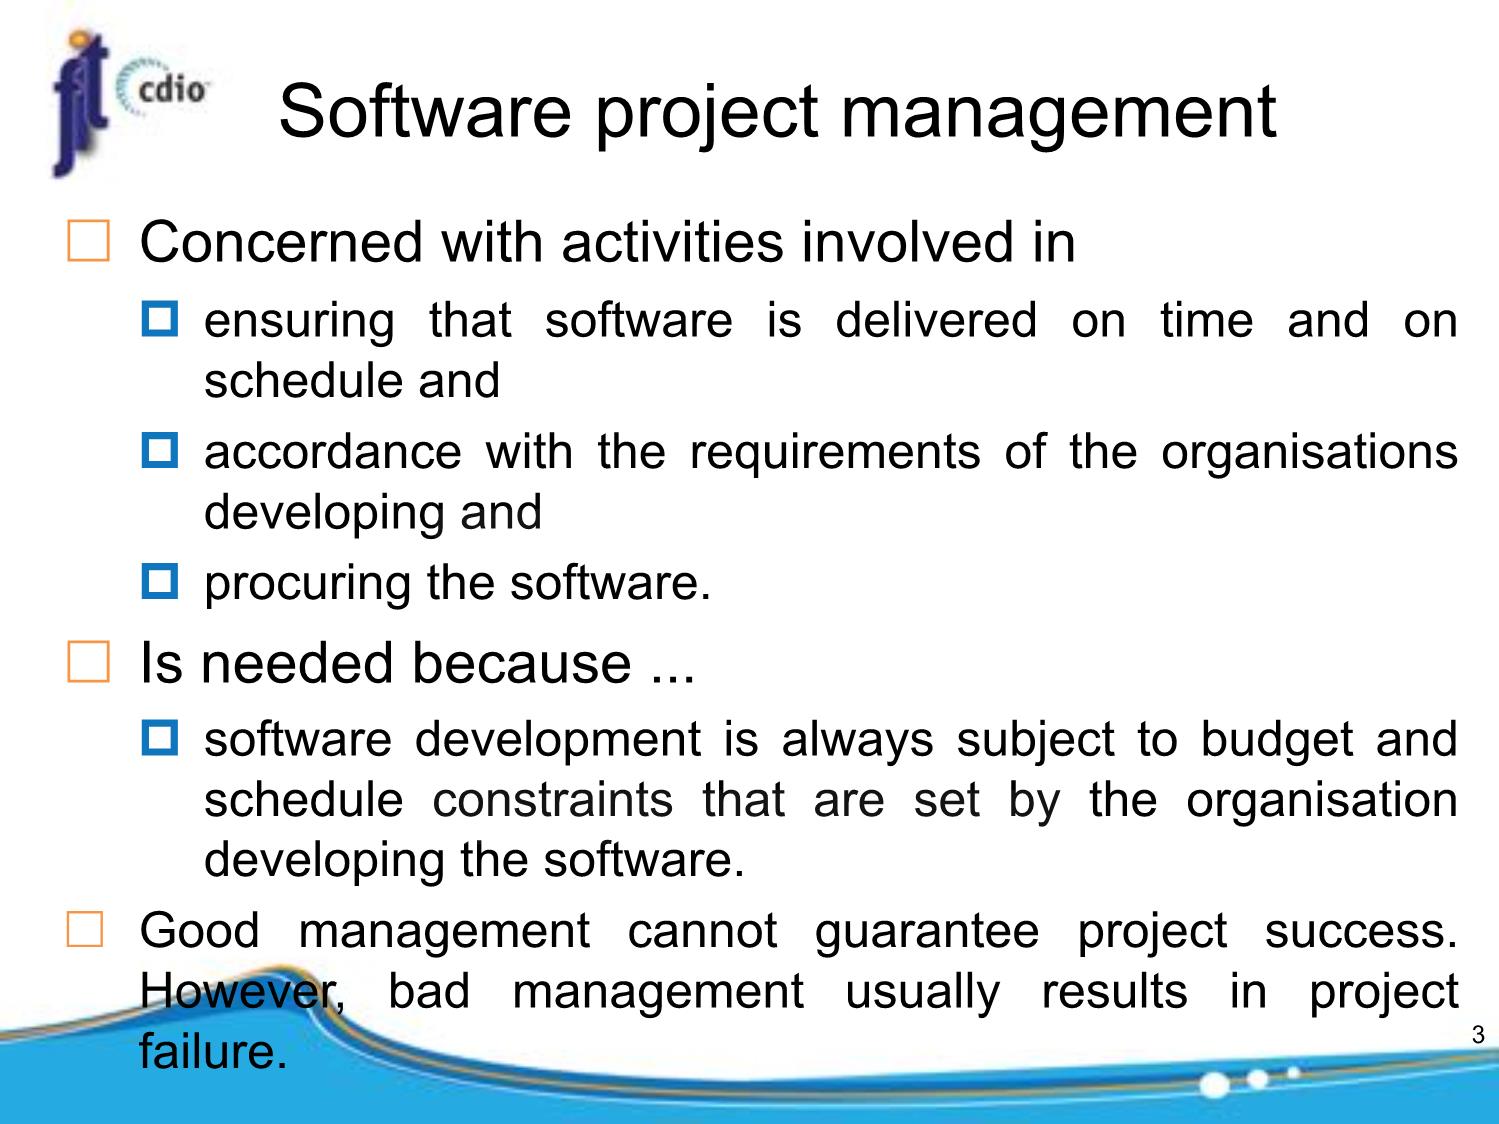 Bài giảng Introduction to Software Engineering - Week 3: Project management - Nguyễn Thị Minh Tuyền trang 3